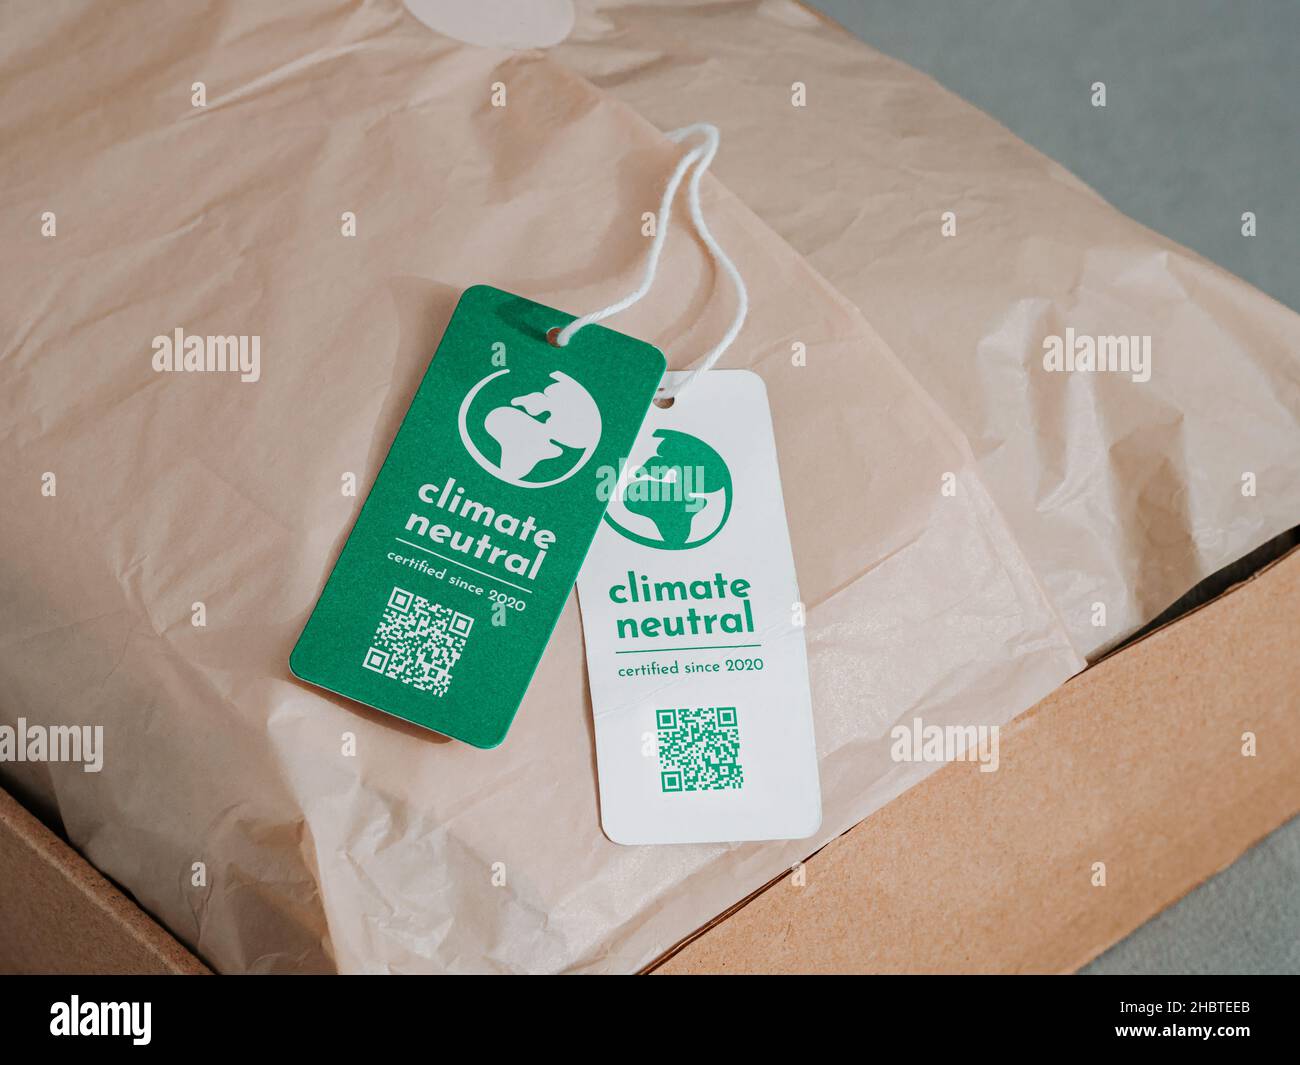 Carbon neutral product in craft corrugated box with label Climate neutral. Carbon neutral label concept in apparel, fashion, logistics indusrty and ethical consumption. Increasing awareness for customers about carbon footpint Stock Photo